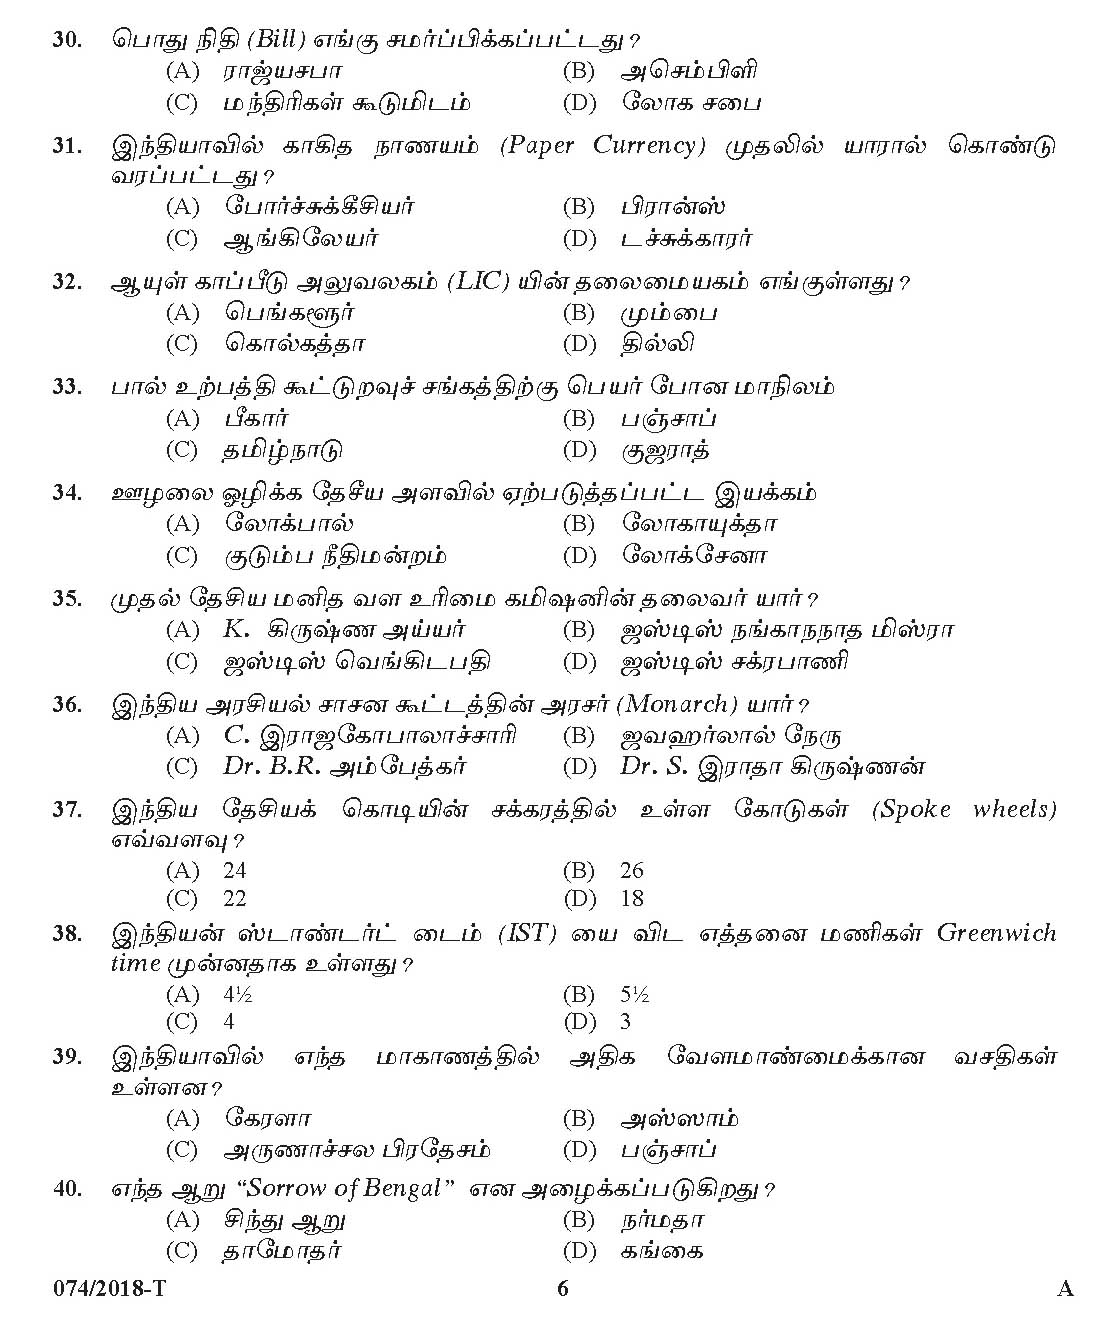 Kerala PSC Police Constable Driver Exam 2018 Question Paper Code 0742018 T 5